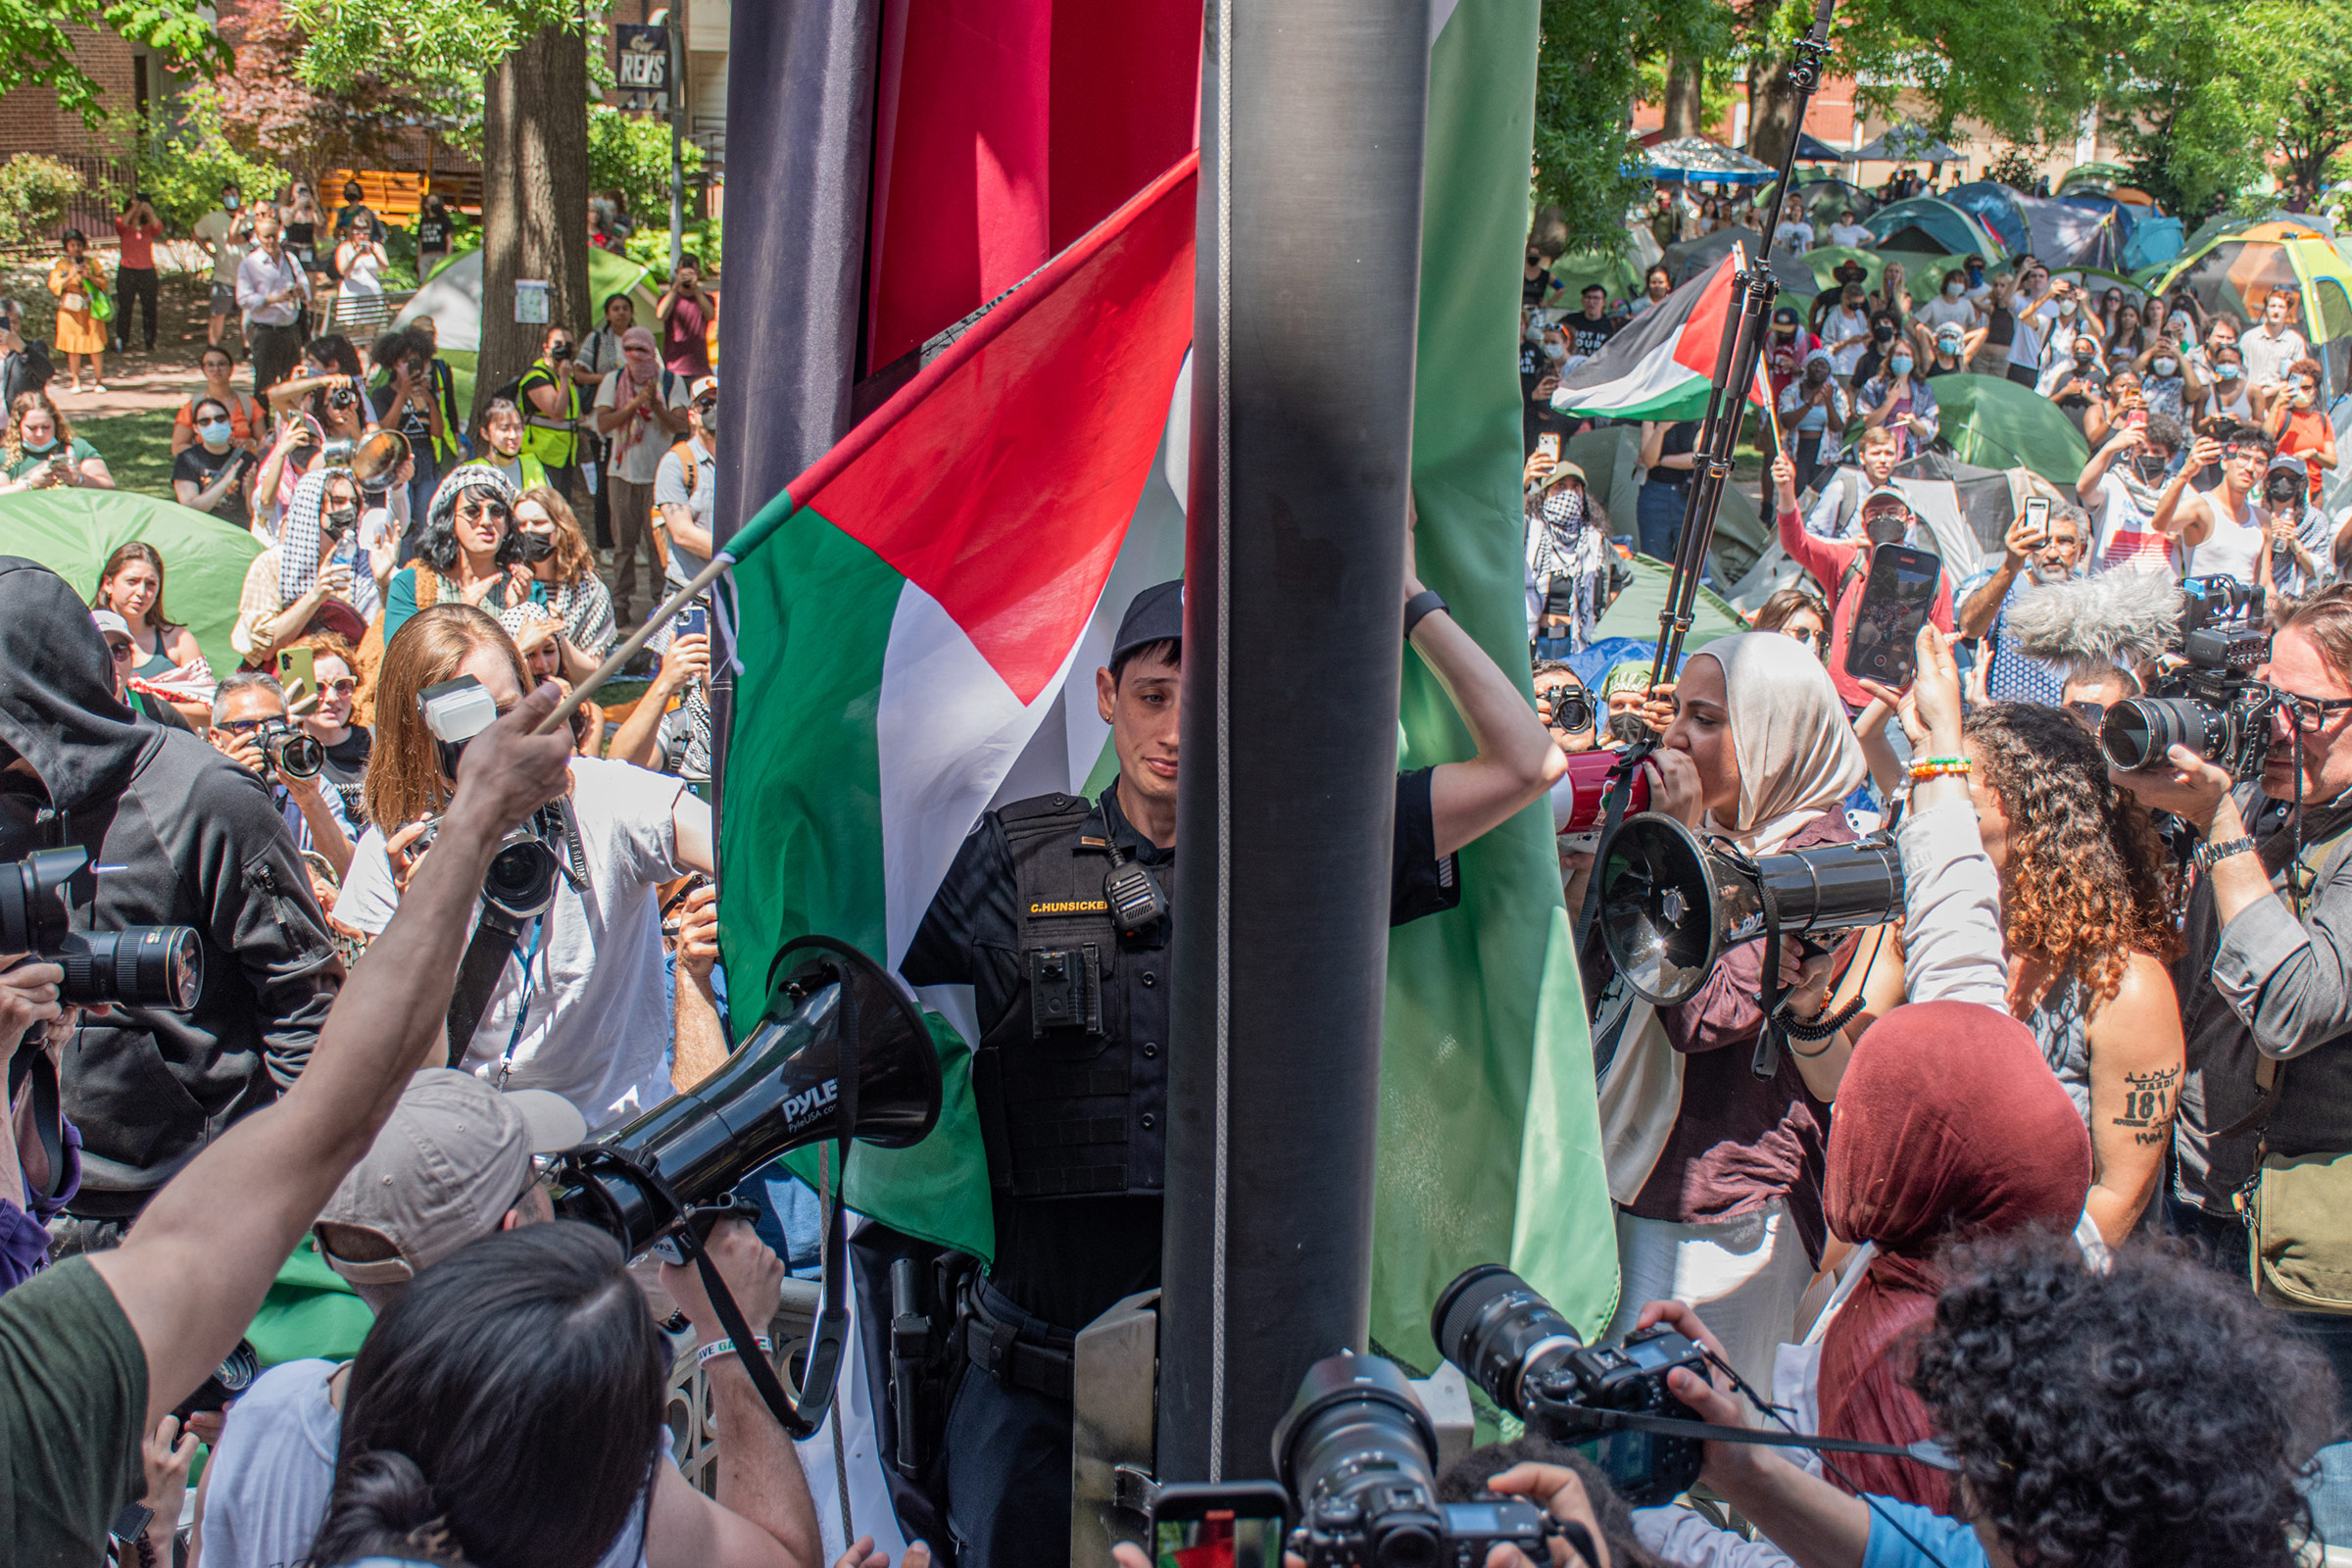 A George Washington University police officer lowers a large Palestinian flag raised by student demonstrators in violation of university policy in Washington, D.C., on May 2.